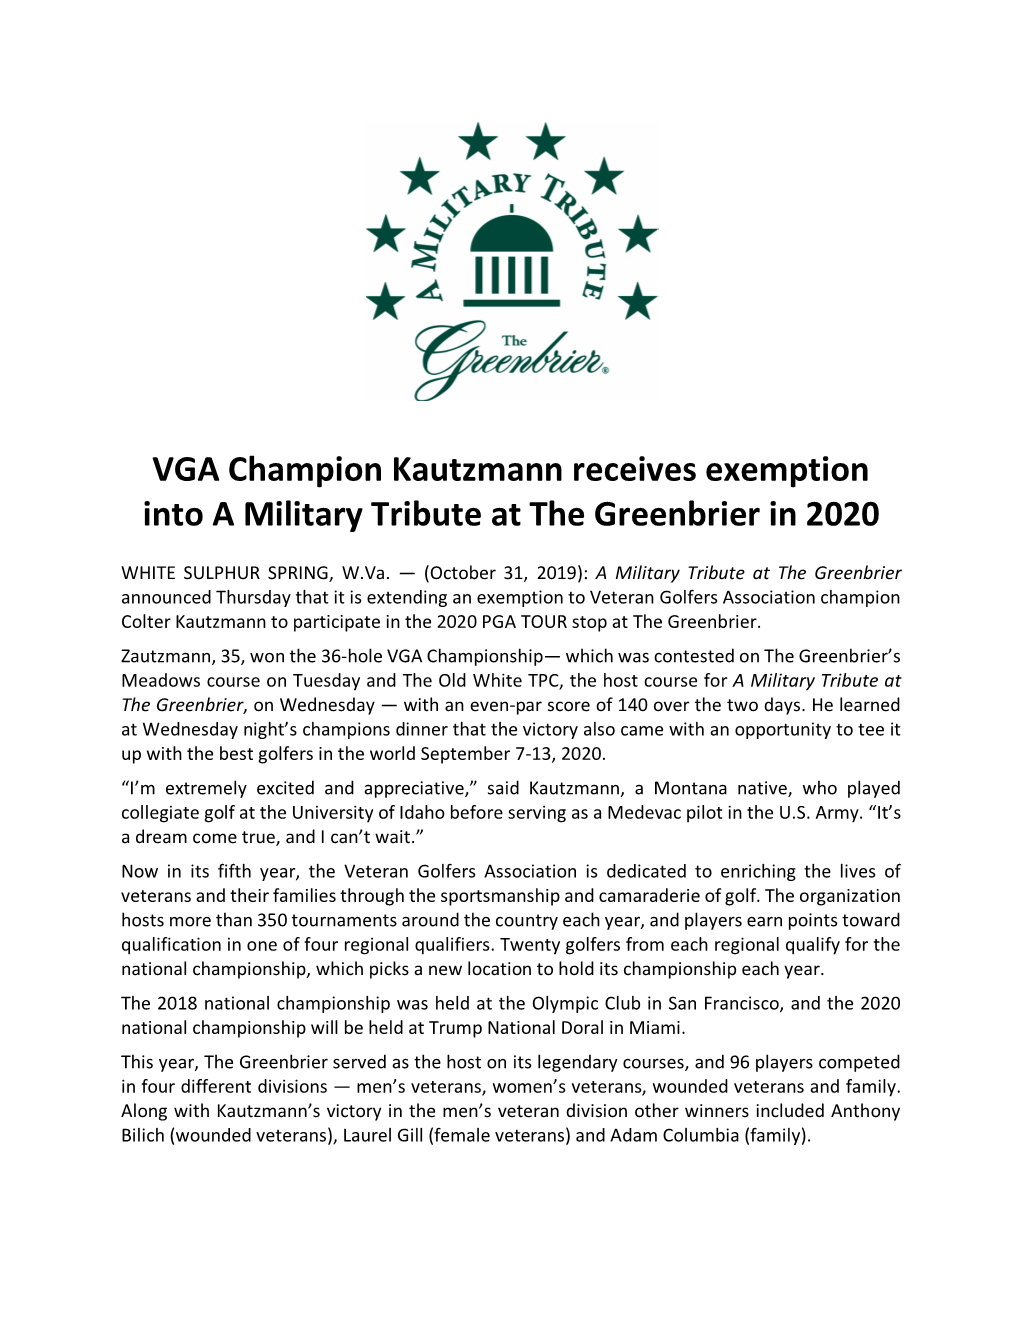 VGA Champion Kautzmann Receives Exemption Into a Military Tribute at the Greenbrier in 2020